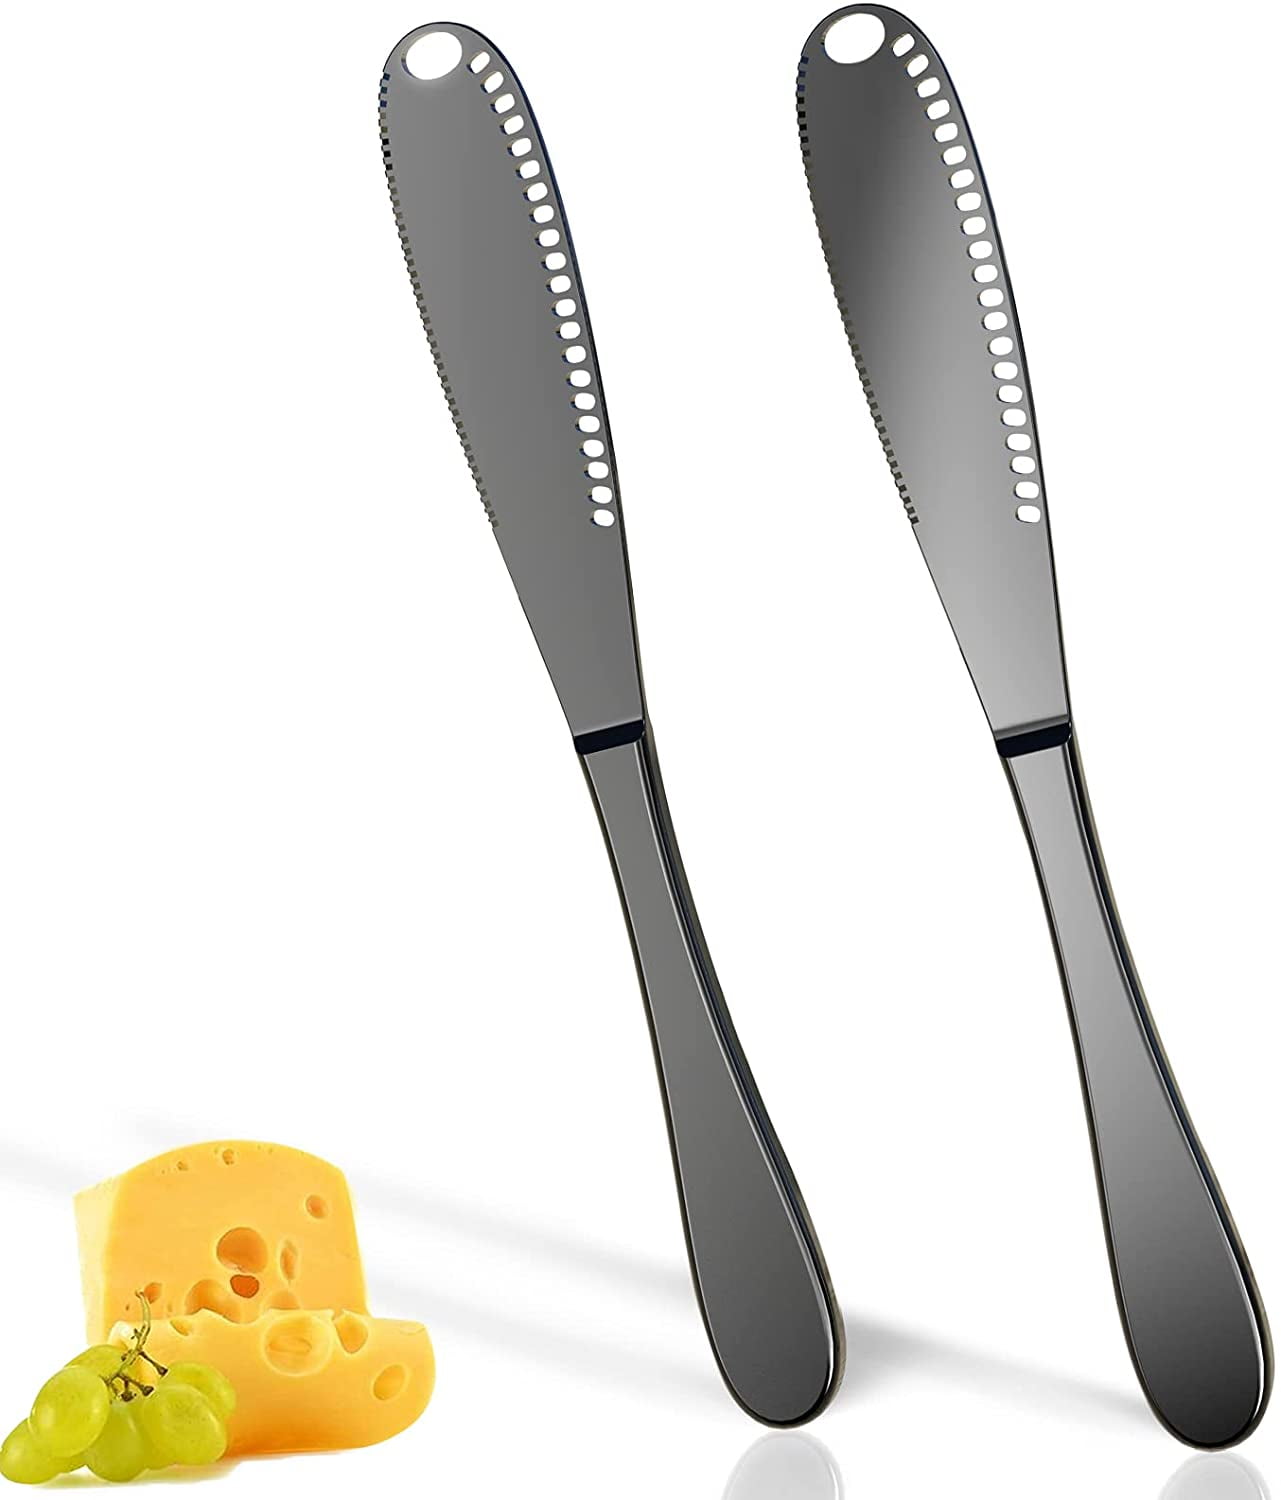 LNKOOMulti-function Butter Knife, 3 in1 Stainless Steel Kitchen Butter Curler & Spreader with Serrated Edge, Shredding Slots for Cutting Vegetables